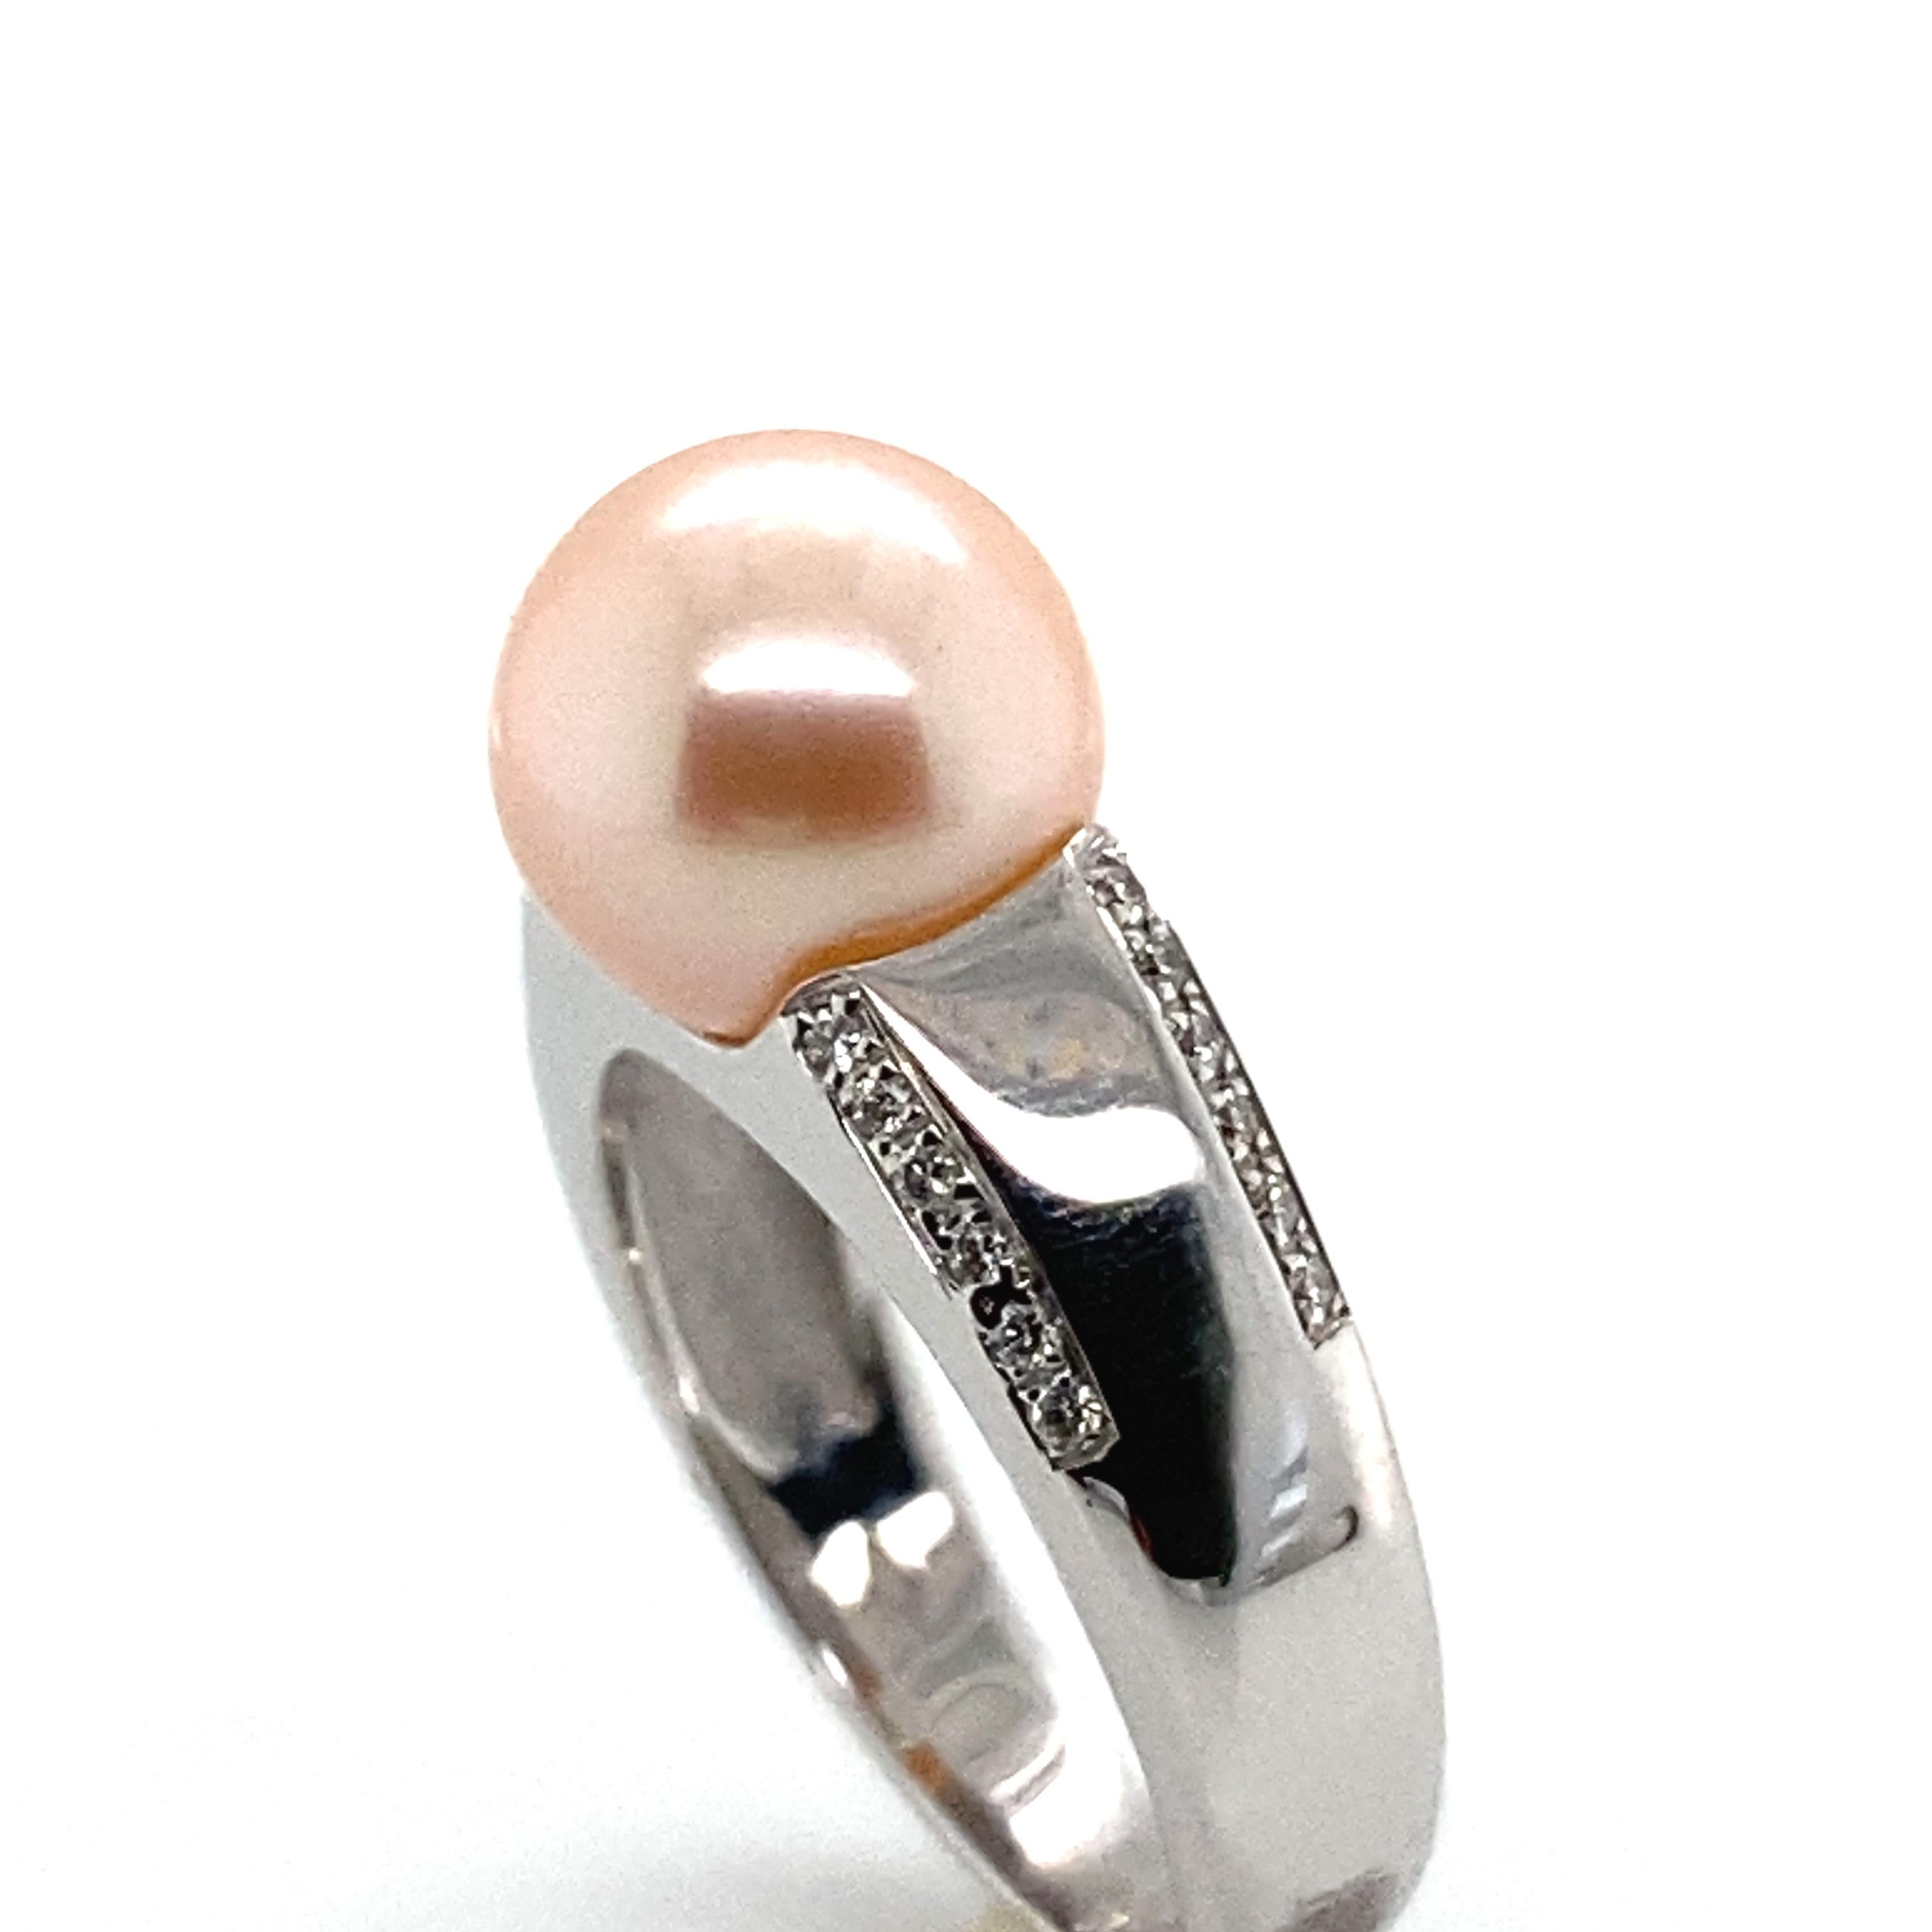 Immerse yourself in timeless elegance with this sumptuous White Gold Ring adorned with a magnificent Pink Cultured Pearl and sparkling Diamonds. A true work of jewelry art that will captivate all eyes.

The Pink Cultured Pearl, with a generous